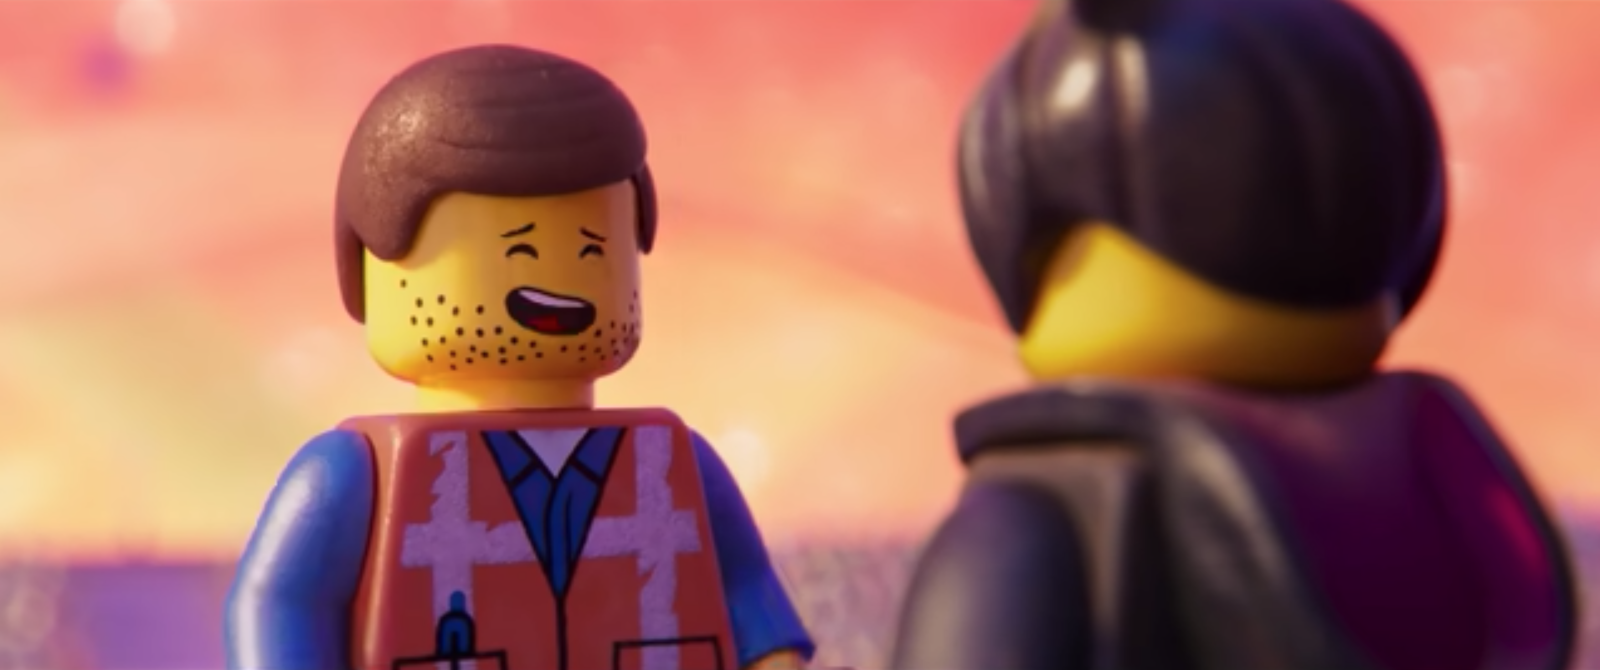 Repræsentere mest åbenbaring This Tweet Proves The Romantic Fan Theory About "The LEGO Movie" Franchise